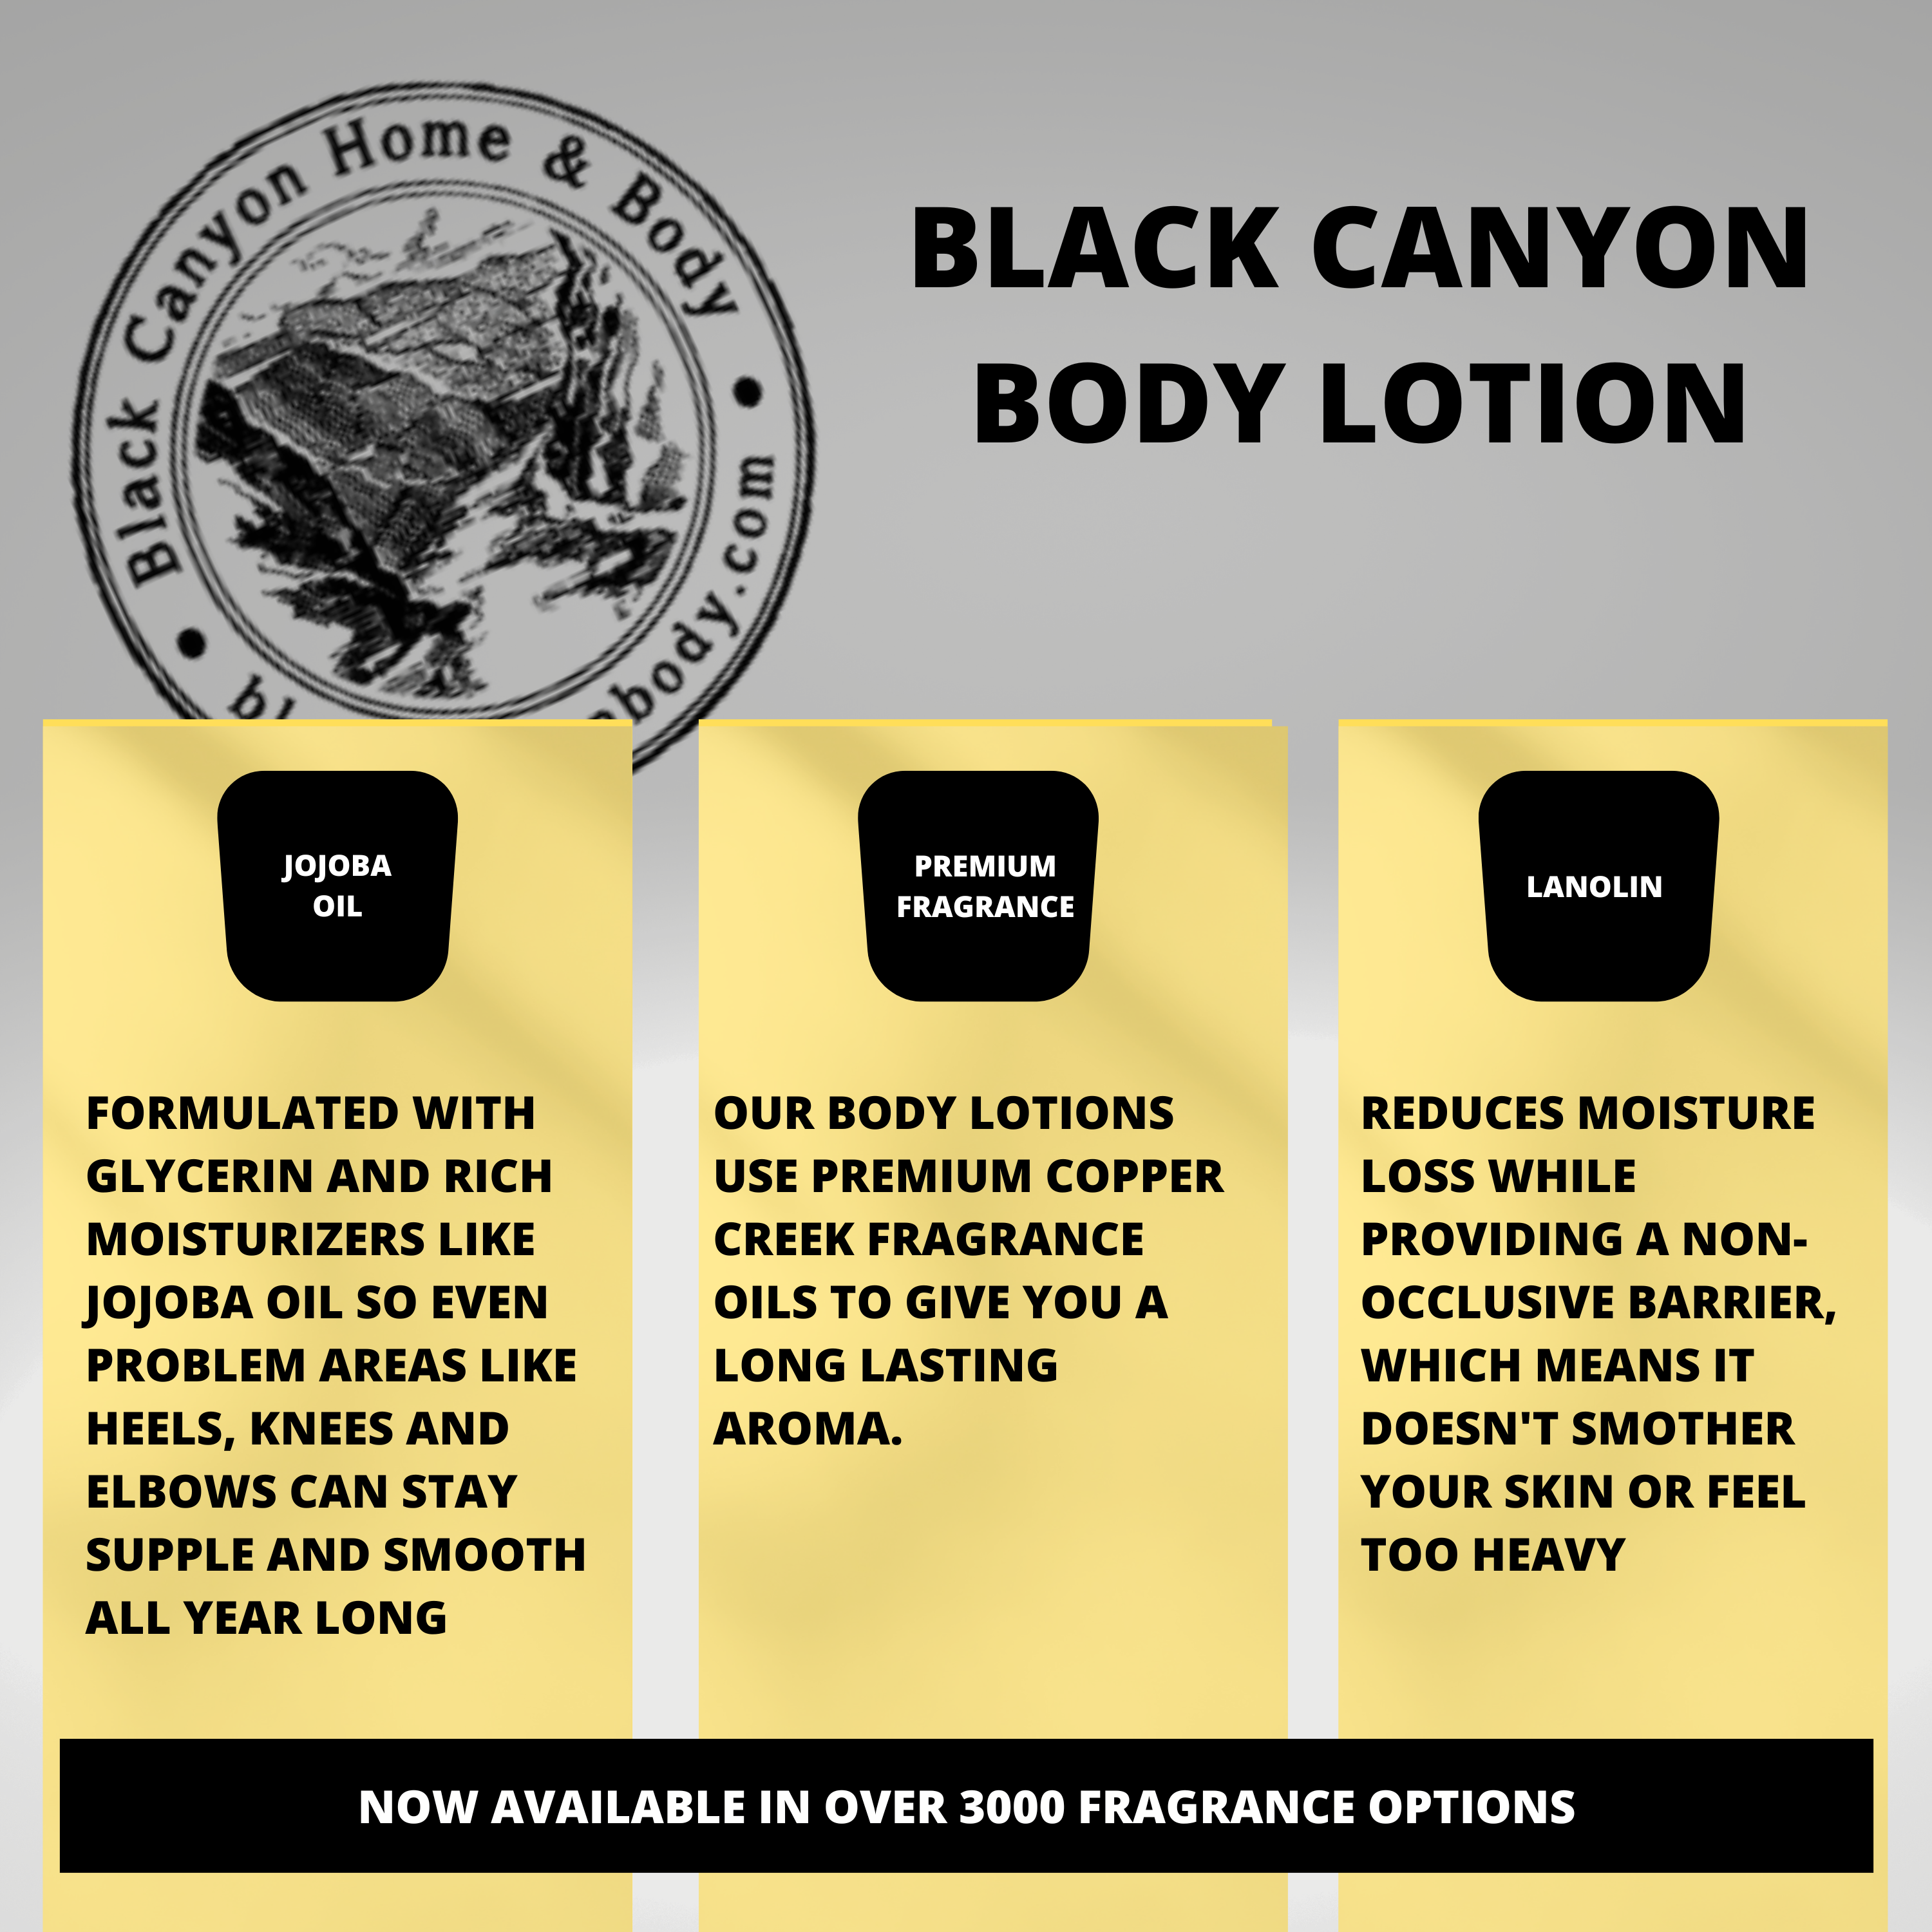 Black Canyon Hookah Scented Luxury Body Lotion with Lanolin and Jojoba Oil